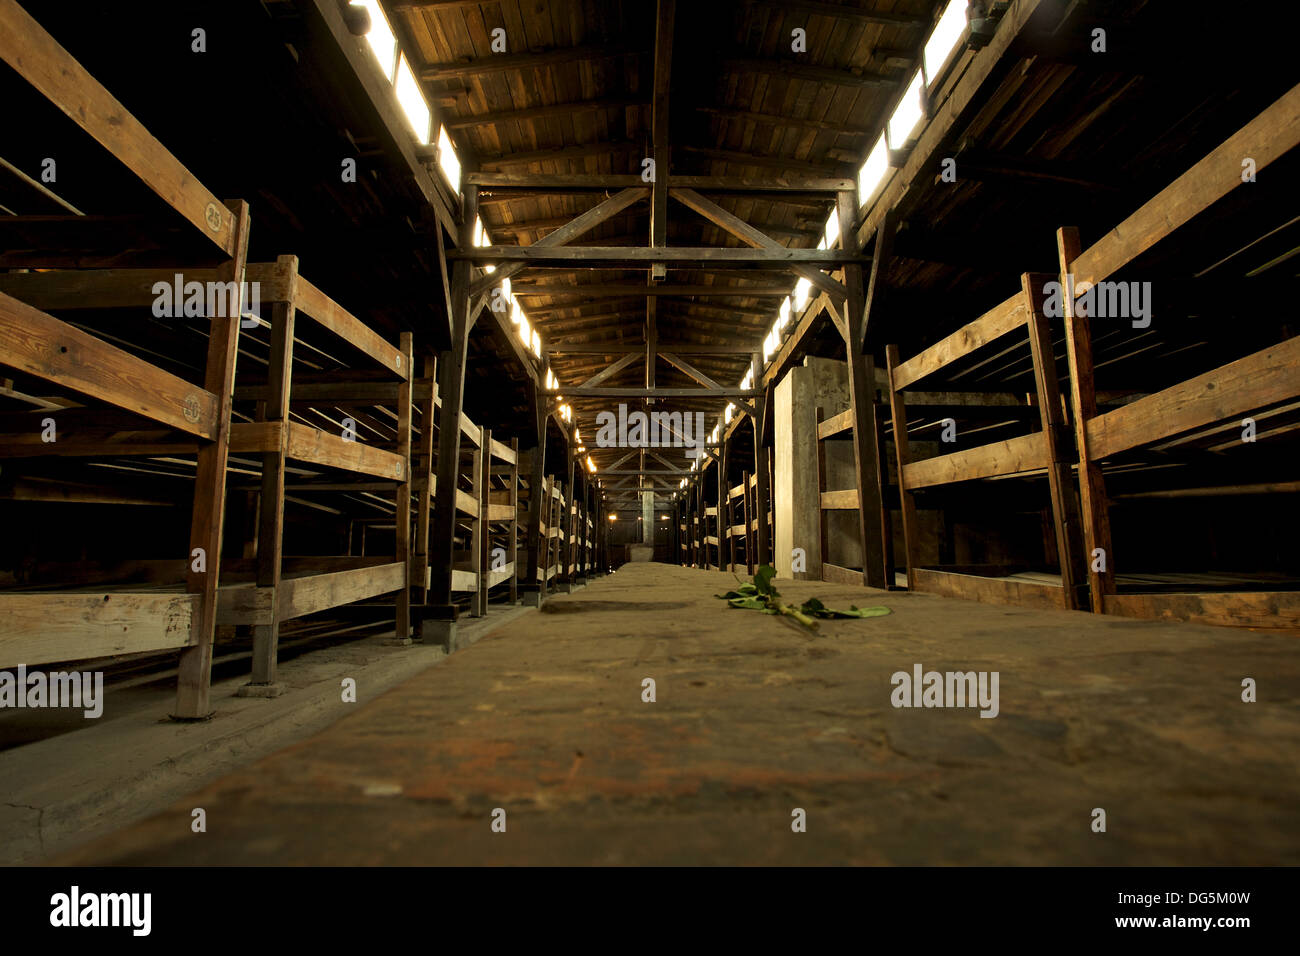 Inside wood houses in Auschwitz Birkenau concentration camp Stock Photo